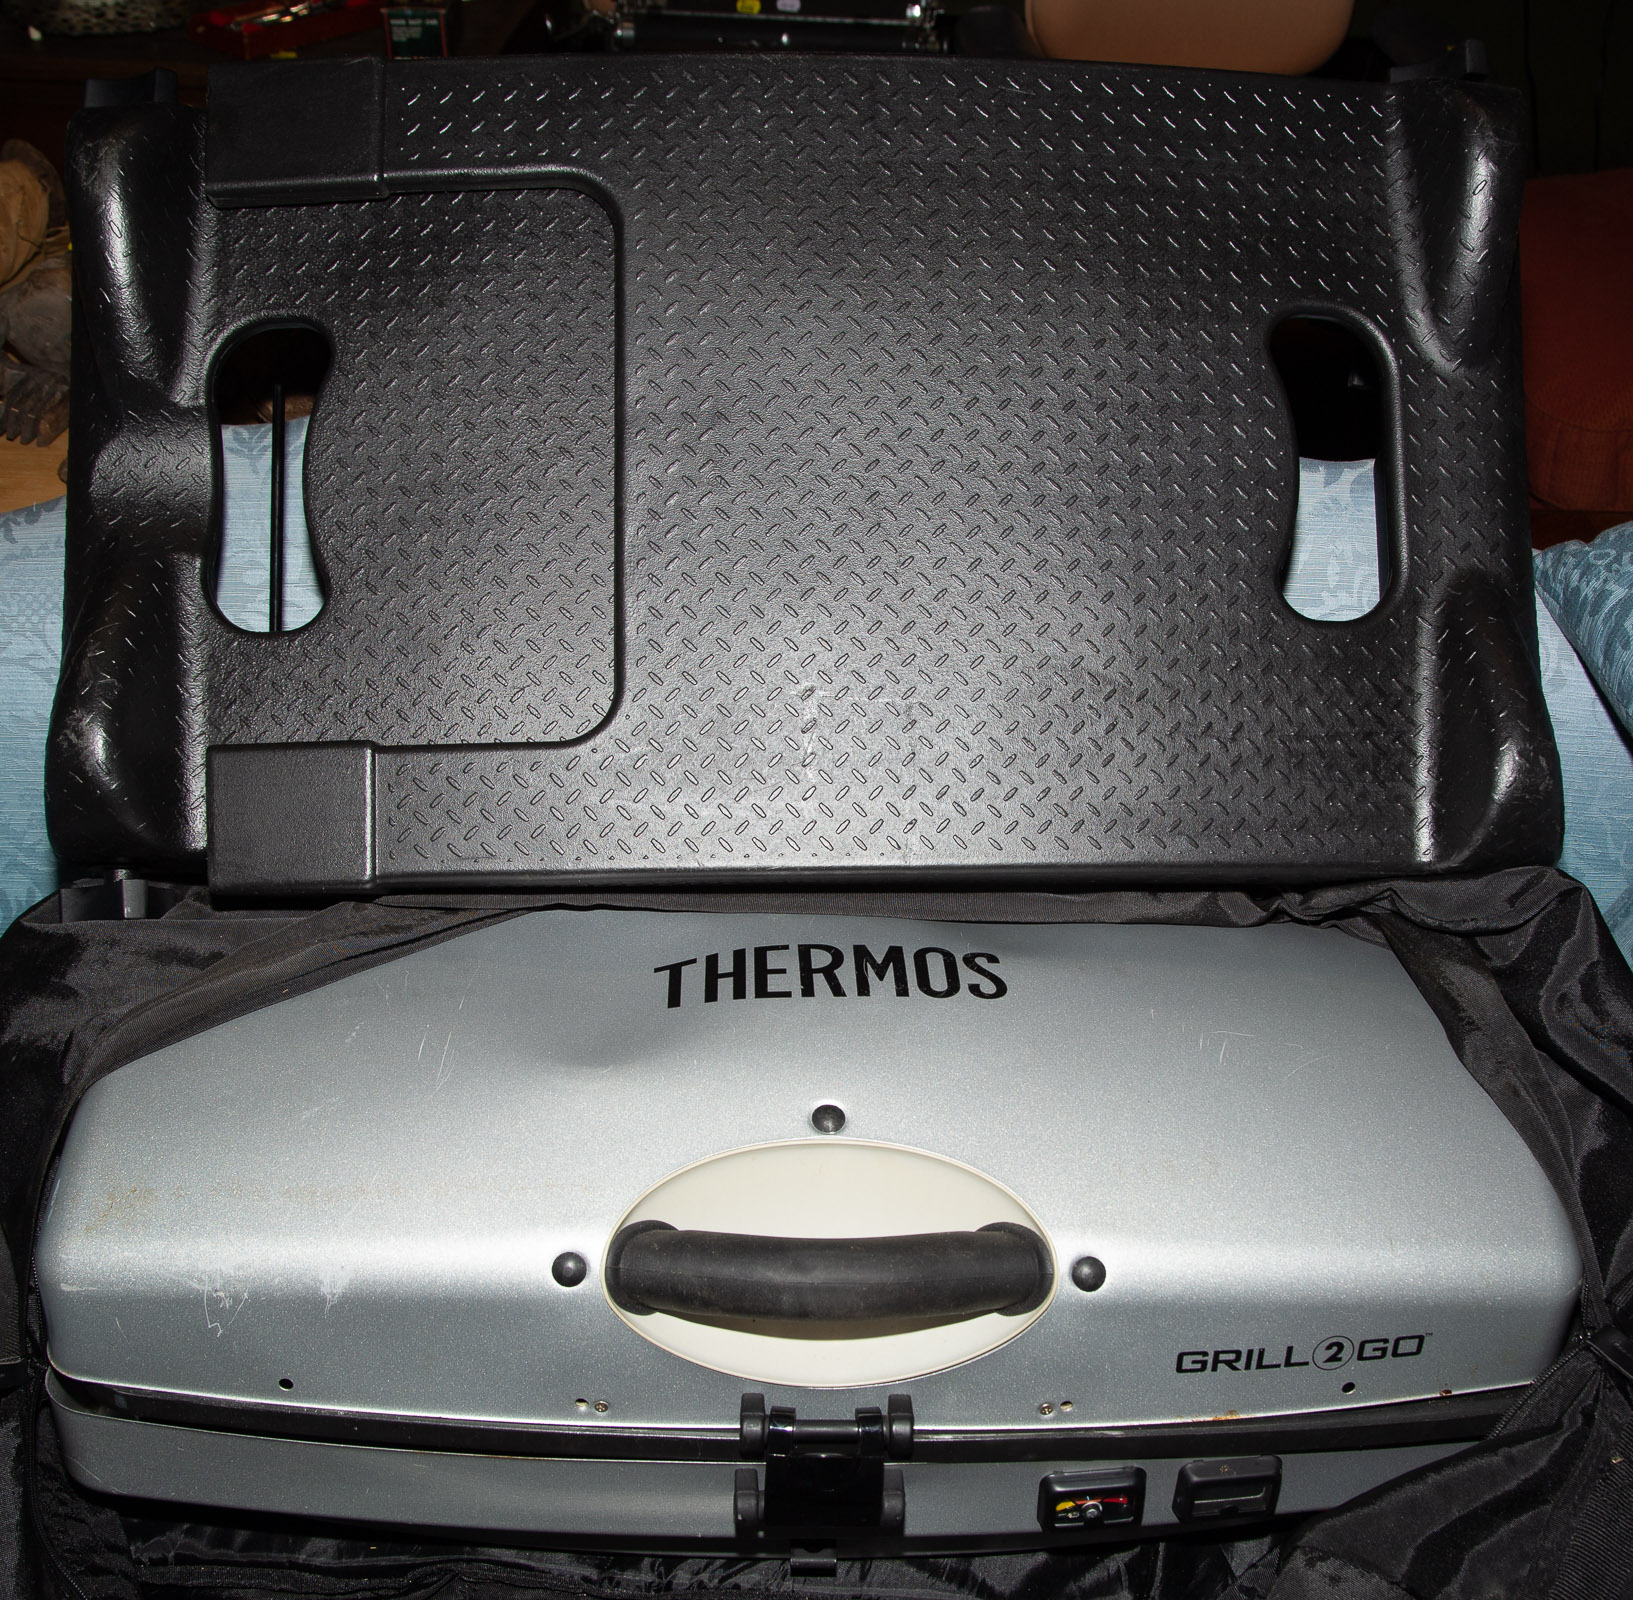 THERMOS GRILL2GO PORTABLE GAS 333f02